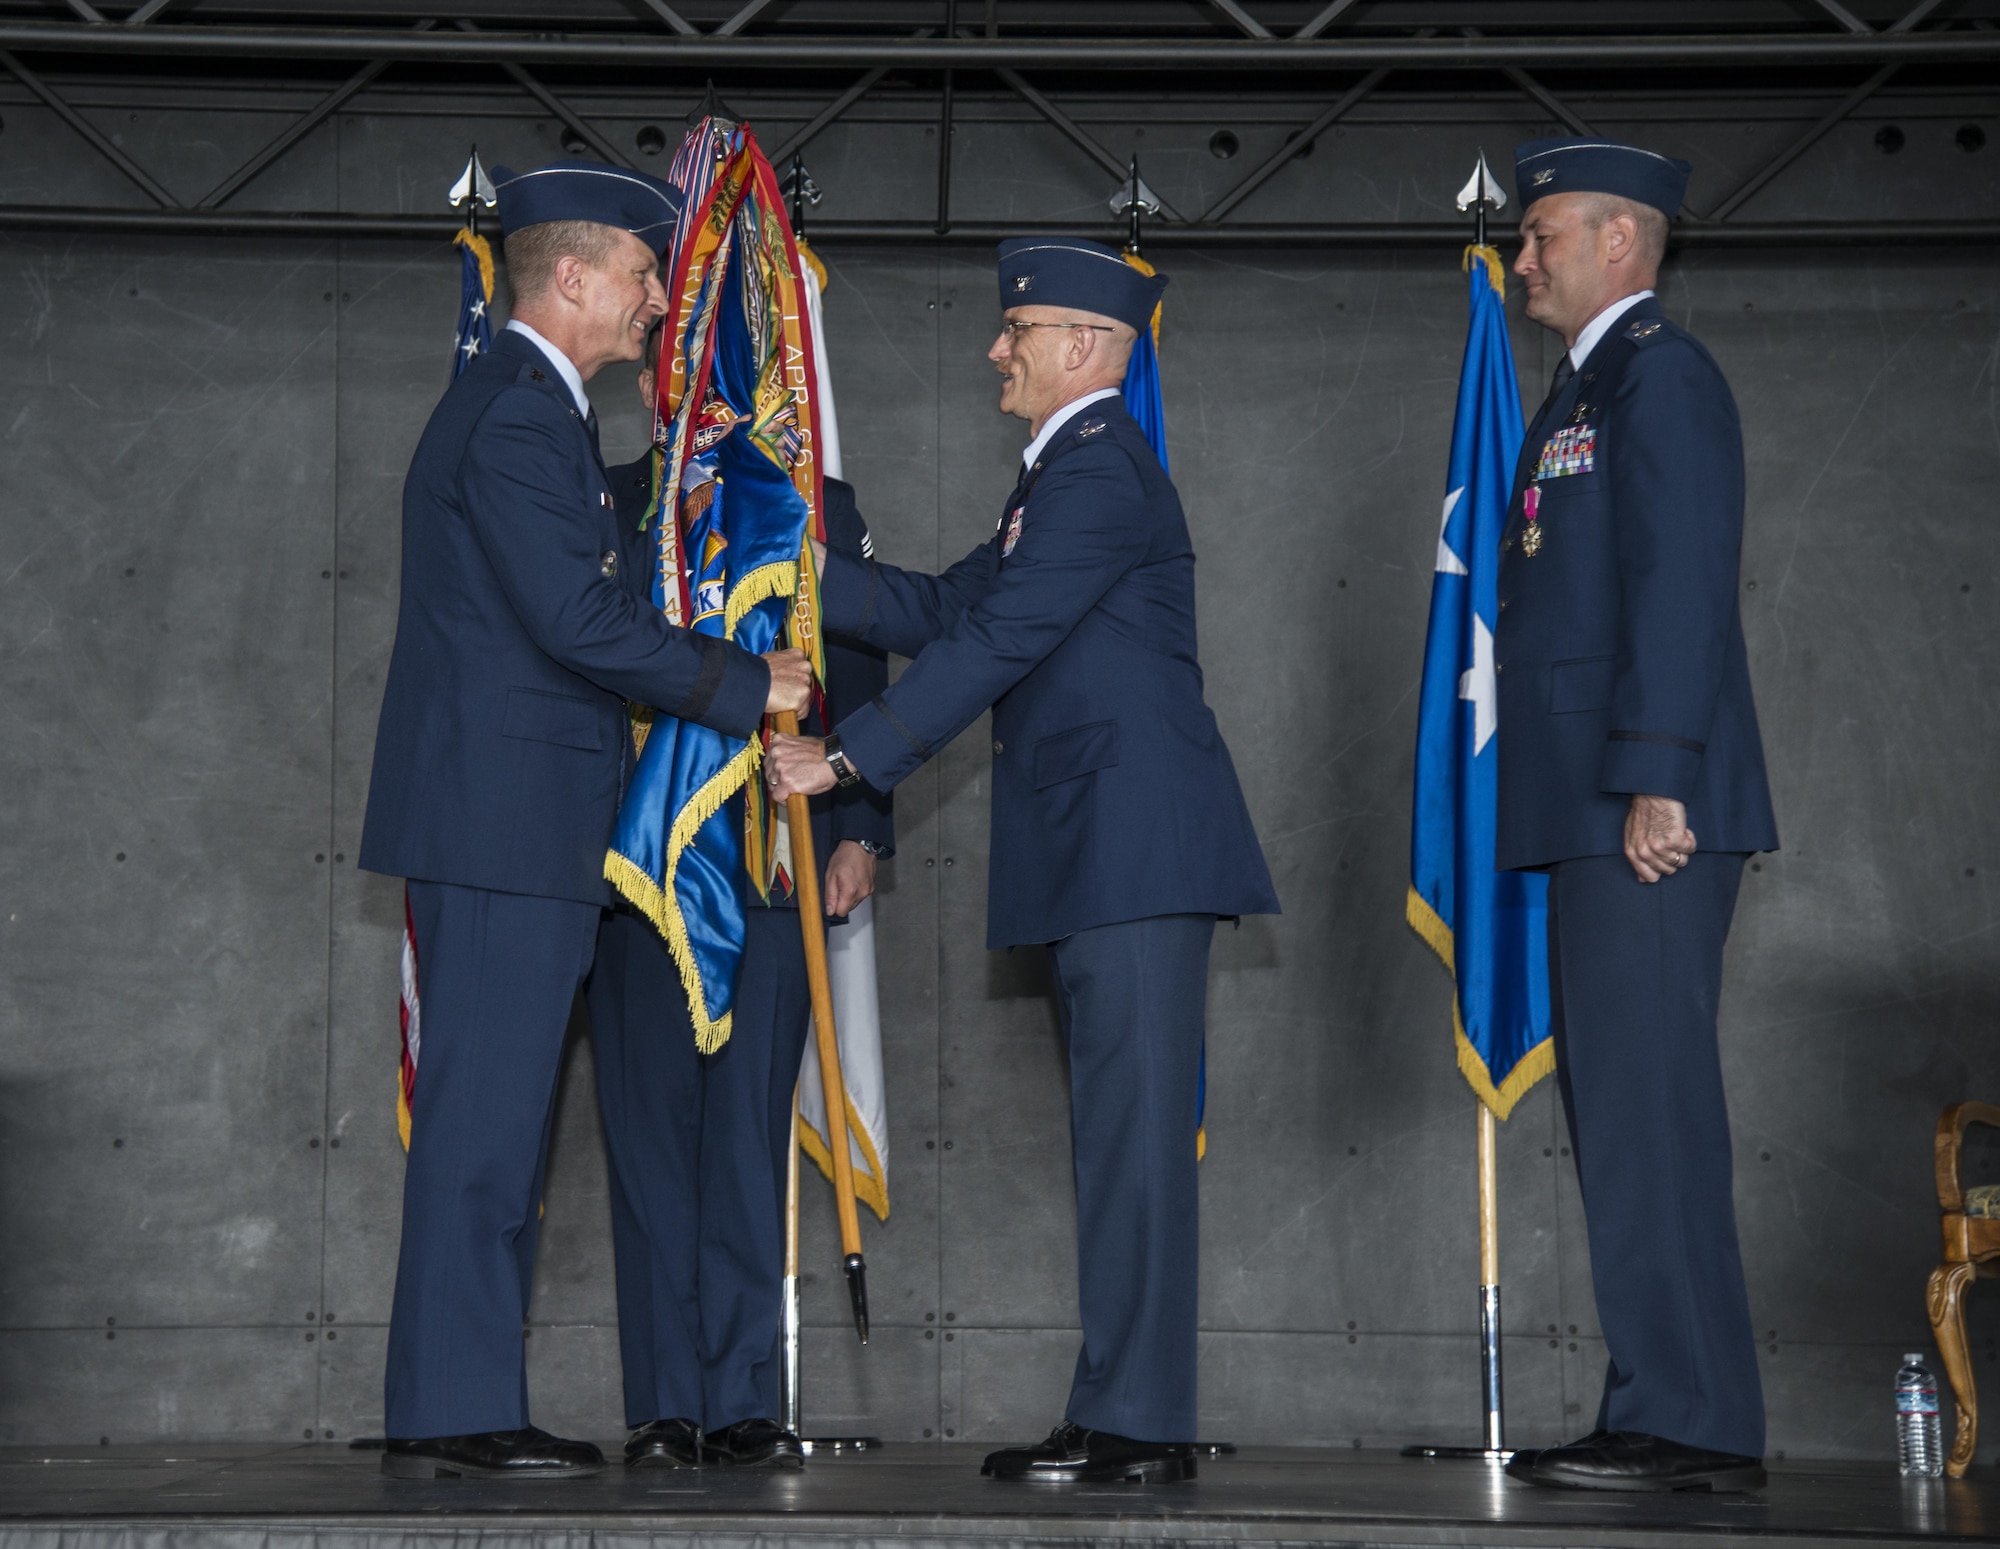 U.S. Air Force Lt. Gen. John L. Dolan, Fifth Air Force commander, left, and Col. R. Scott Jobe, 35th Fighter Wing commander, right, smile for a photo at Misawa Air Base, Japan, July 7, 2016. Airmen gathered to witness Col. Timothy Sundvall, the assistant deputy director of Operations with the Joint Staff J3, relinquish command to Col. R. Scott Jobe, 35th FW commander. (U.S. Air Force photo by Senior Airman Brittany A. Chase)